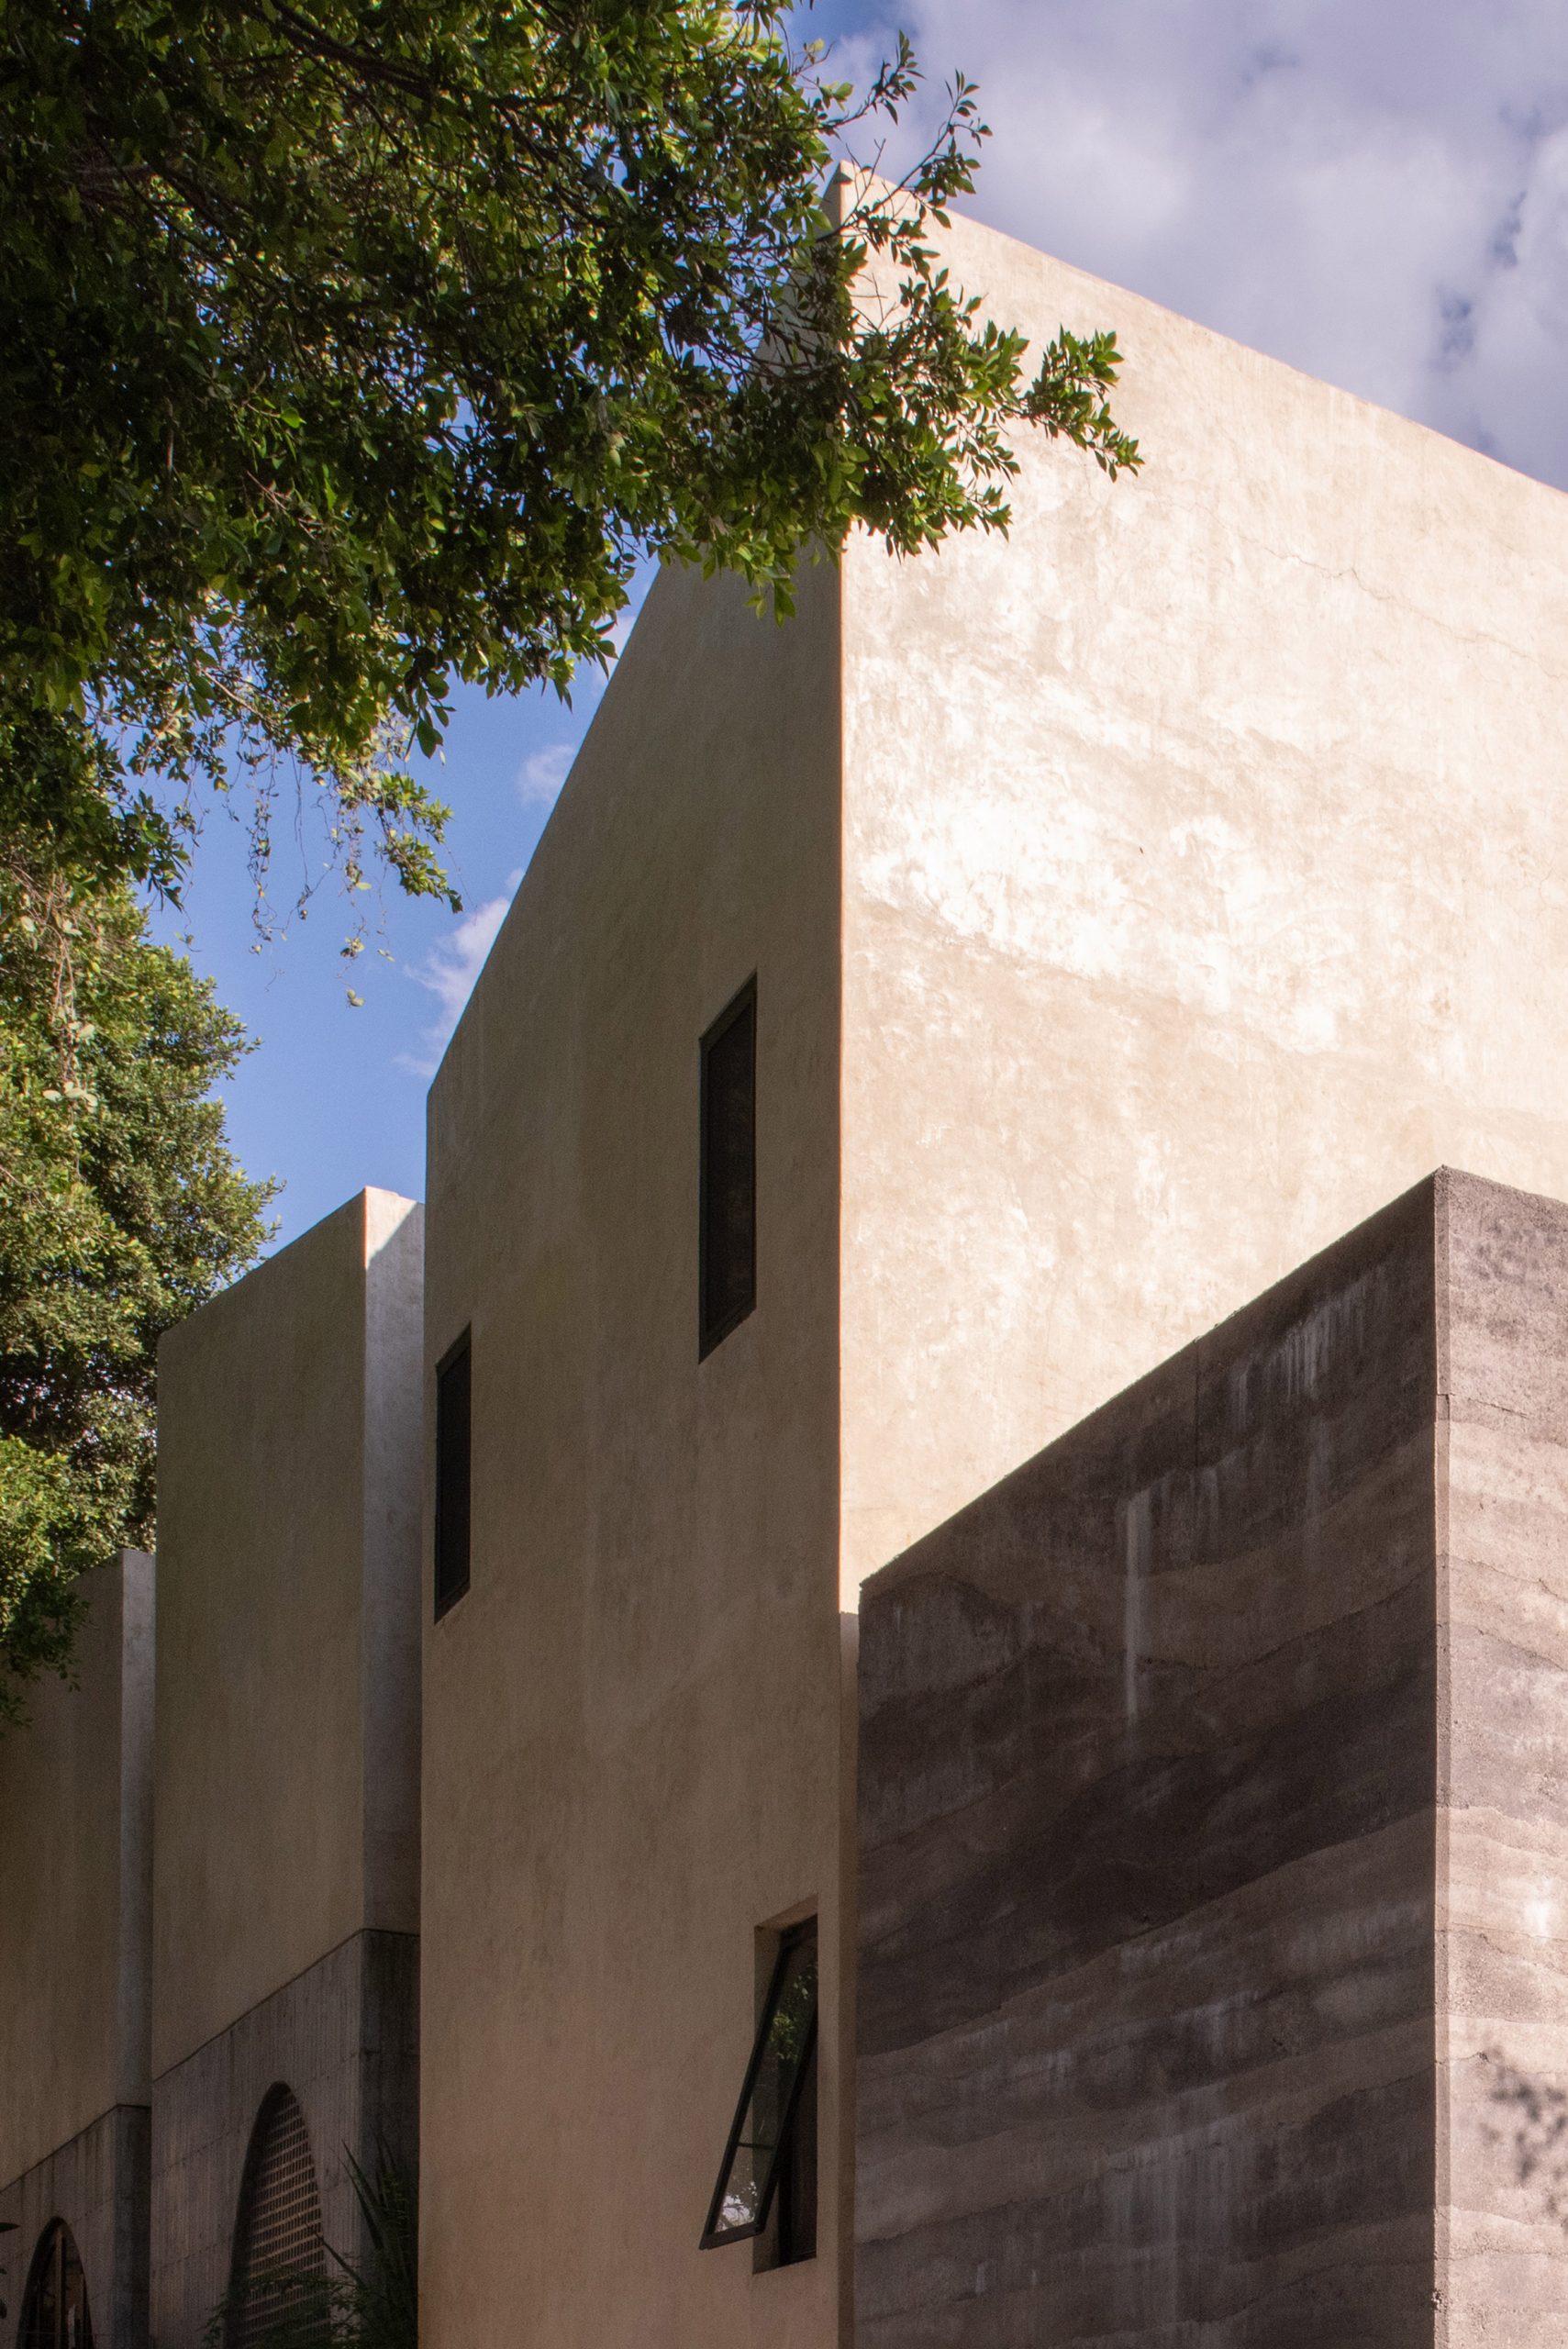 Stucco walls of a house in Mexico